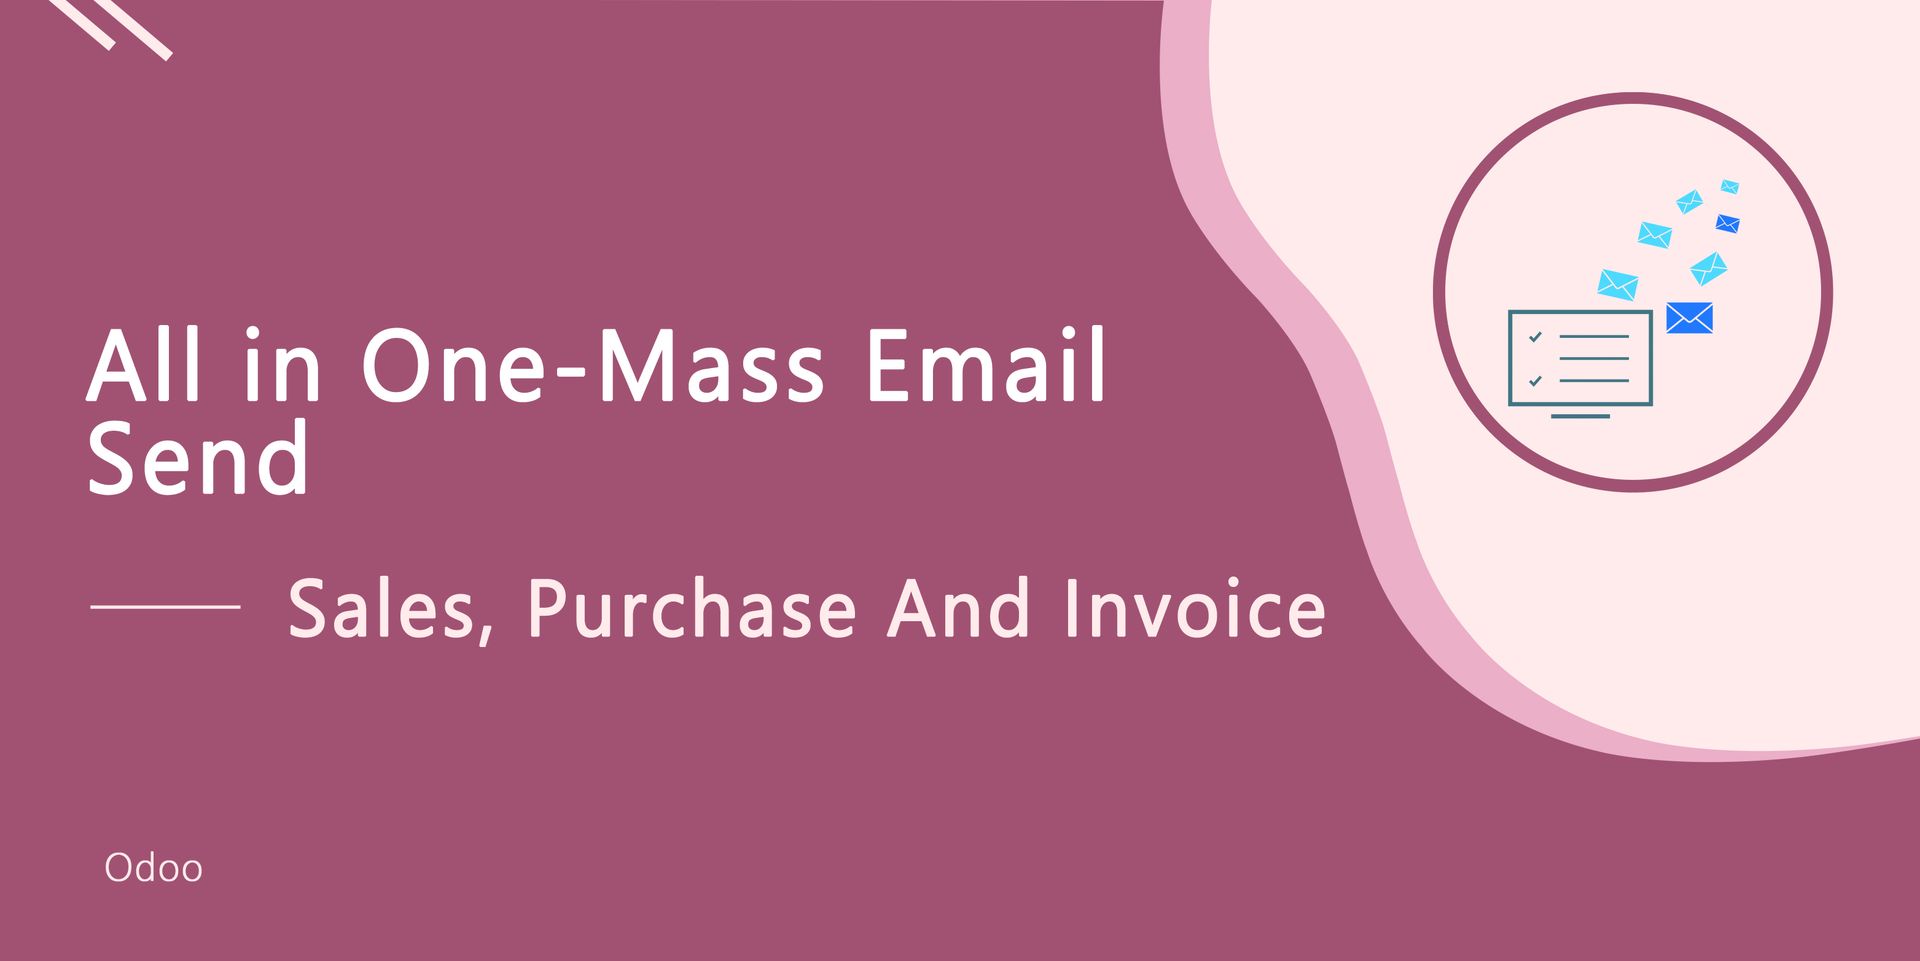 All in one - Mass Email Send
